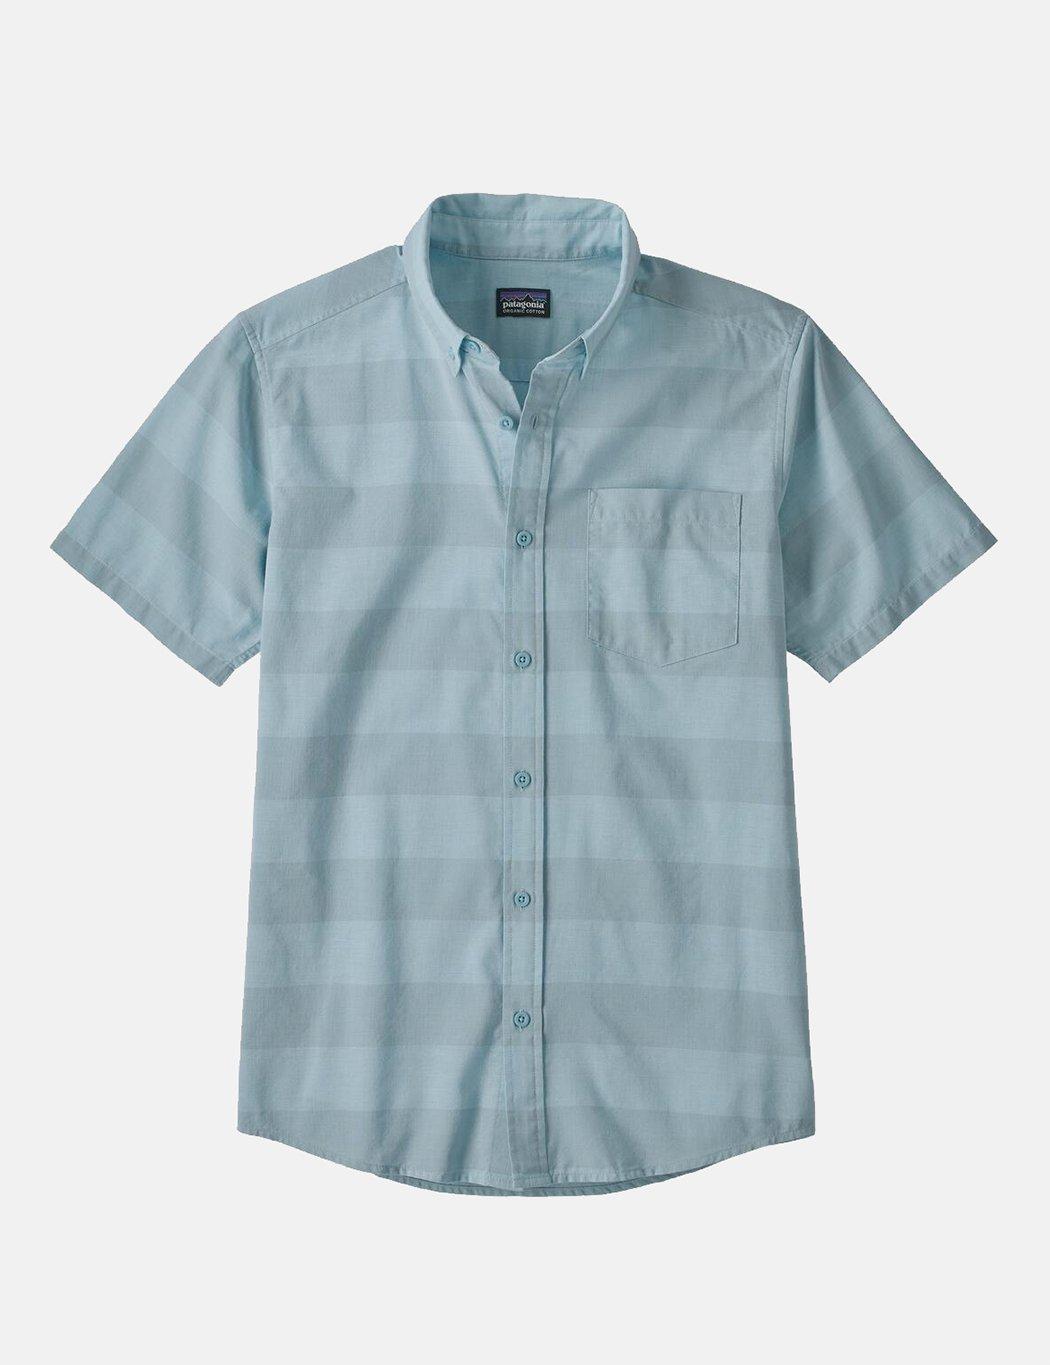 Patagonia Cotton Lightweight Bluffside Shirt in Blue for Men - Lyst